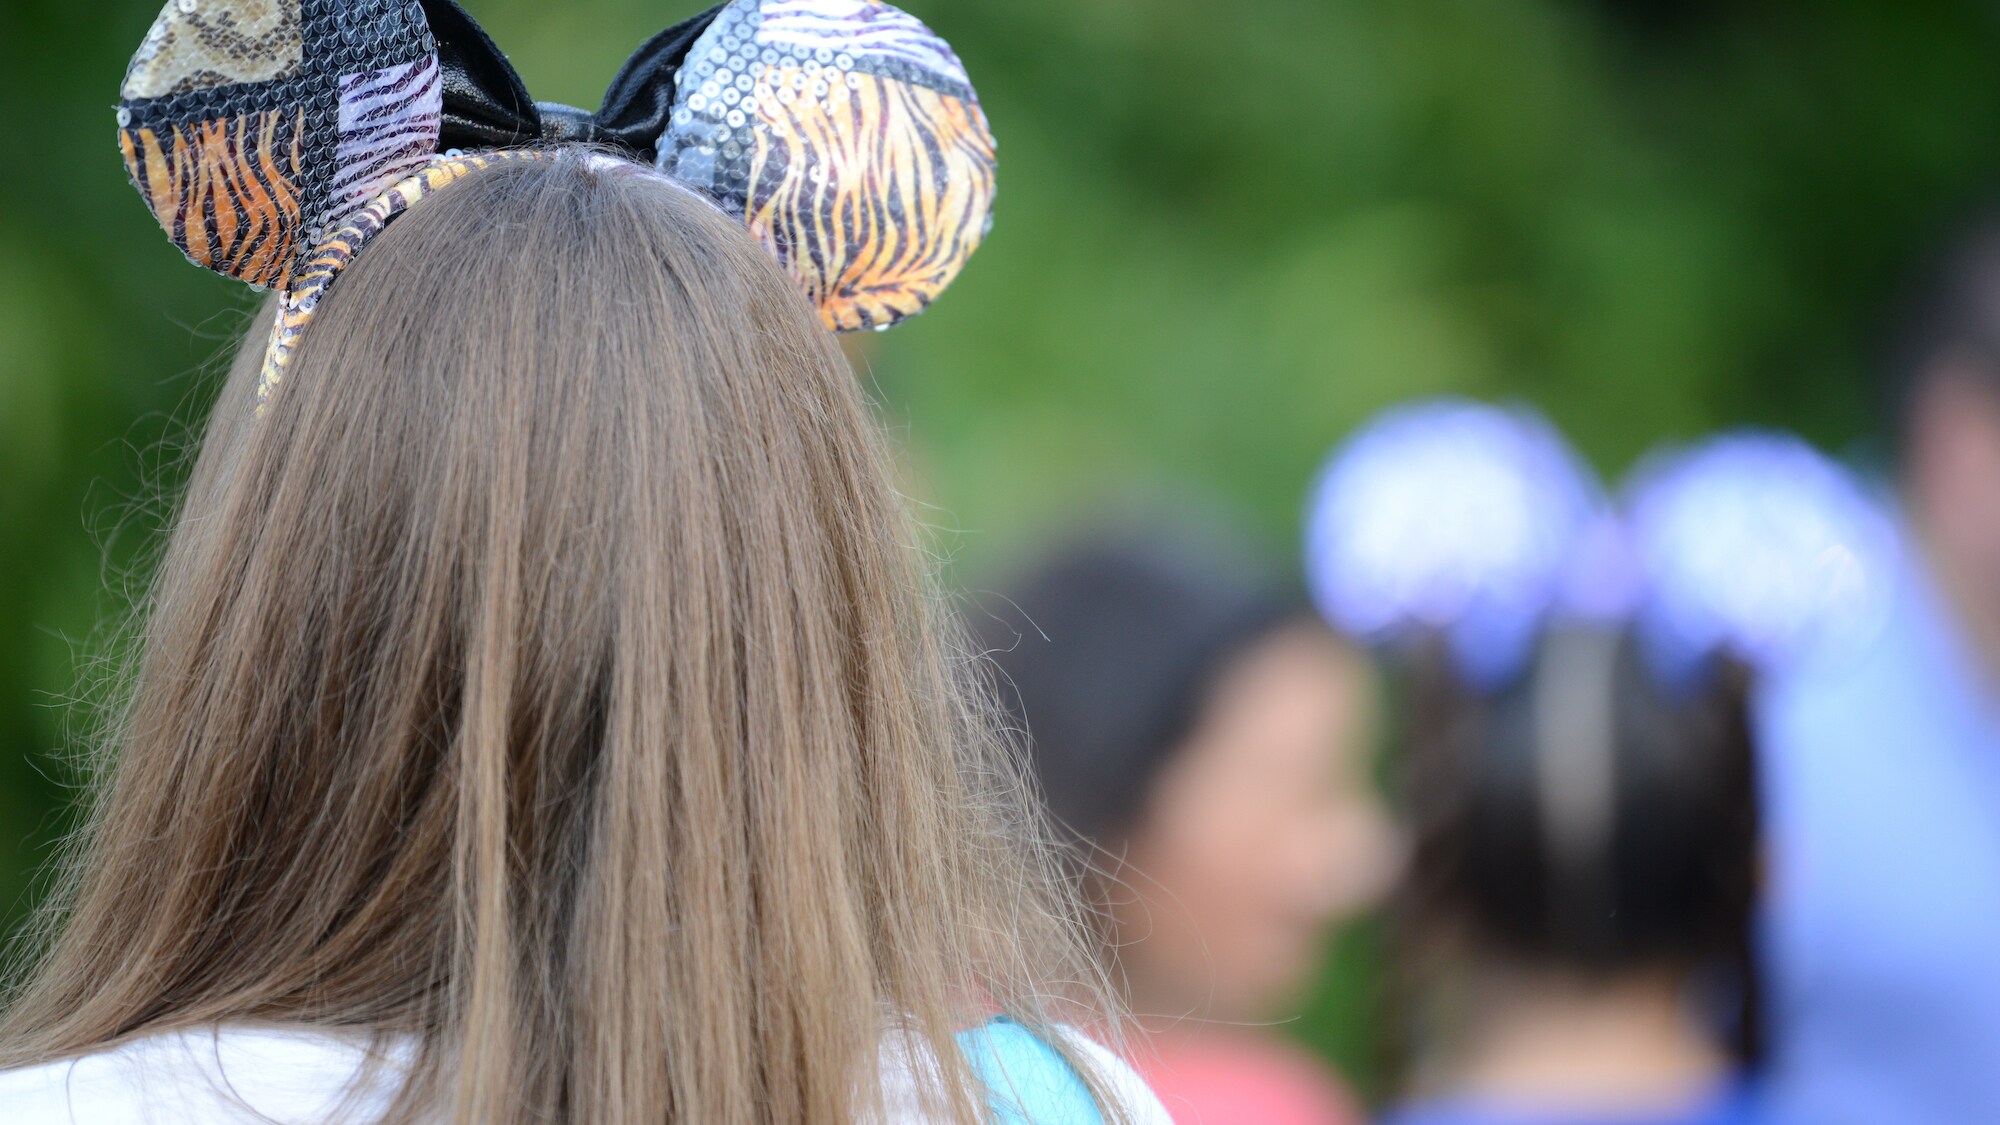 Guest wearing animal print Mickey Mouse ears. (National Geographic/Gene Page)